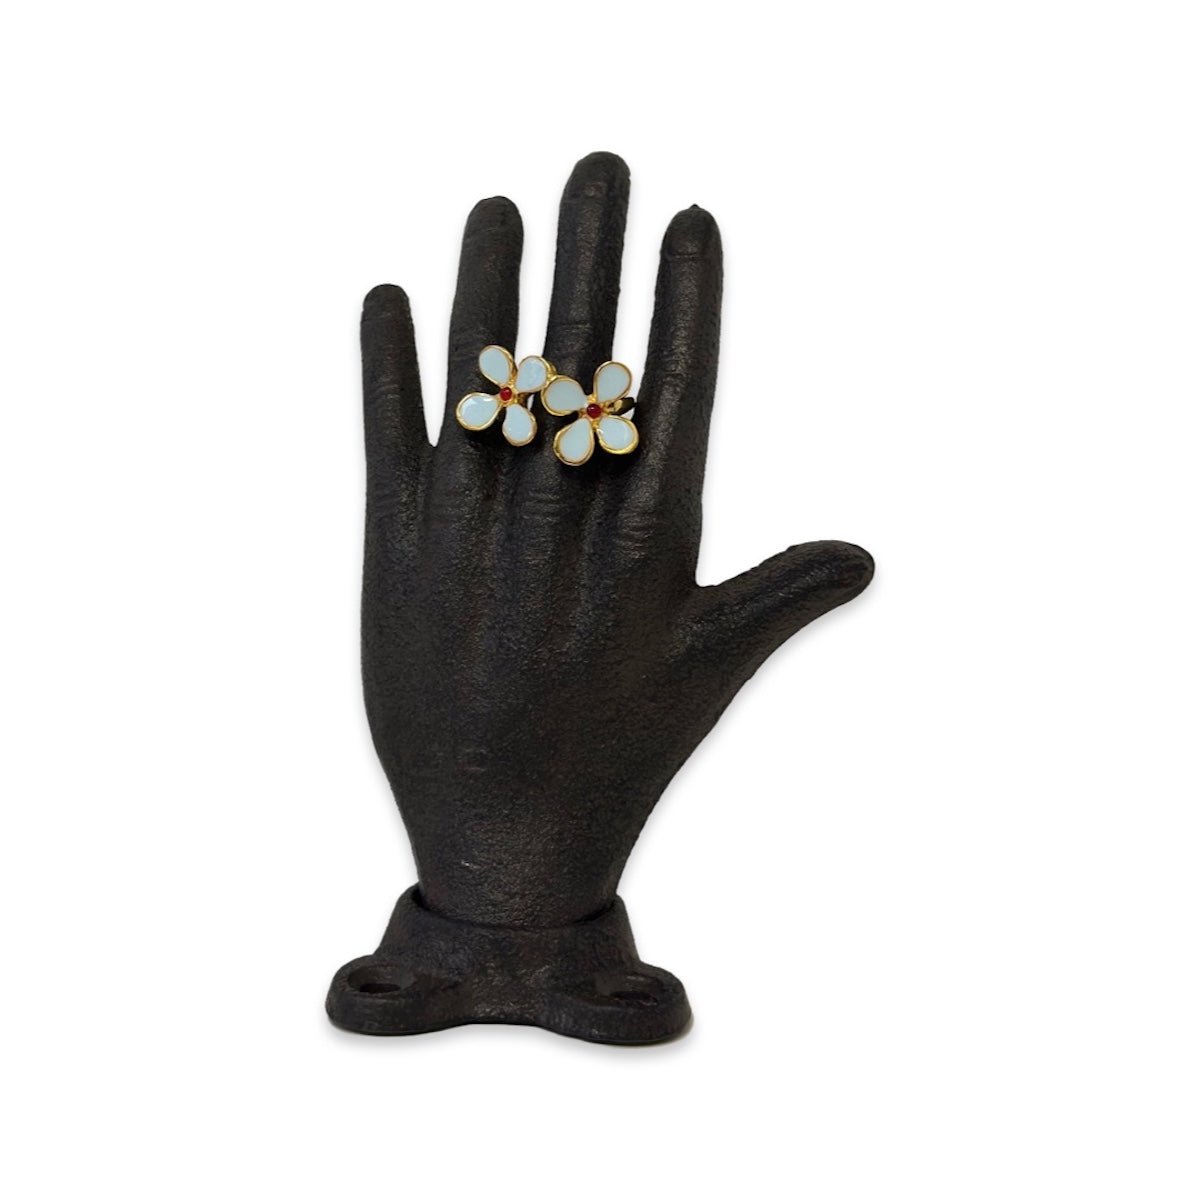 Blue mimosa ring on black hand sculpture on a white background